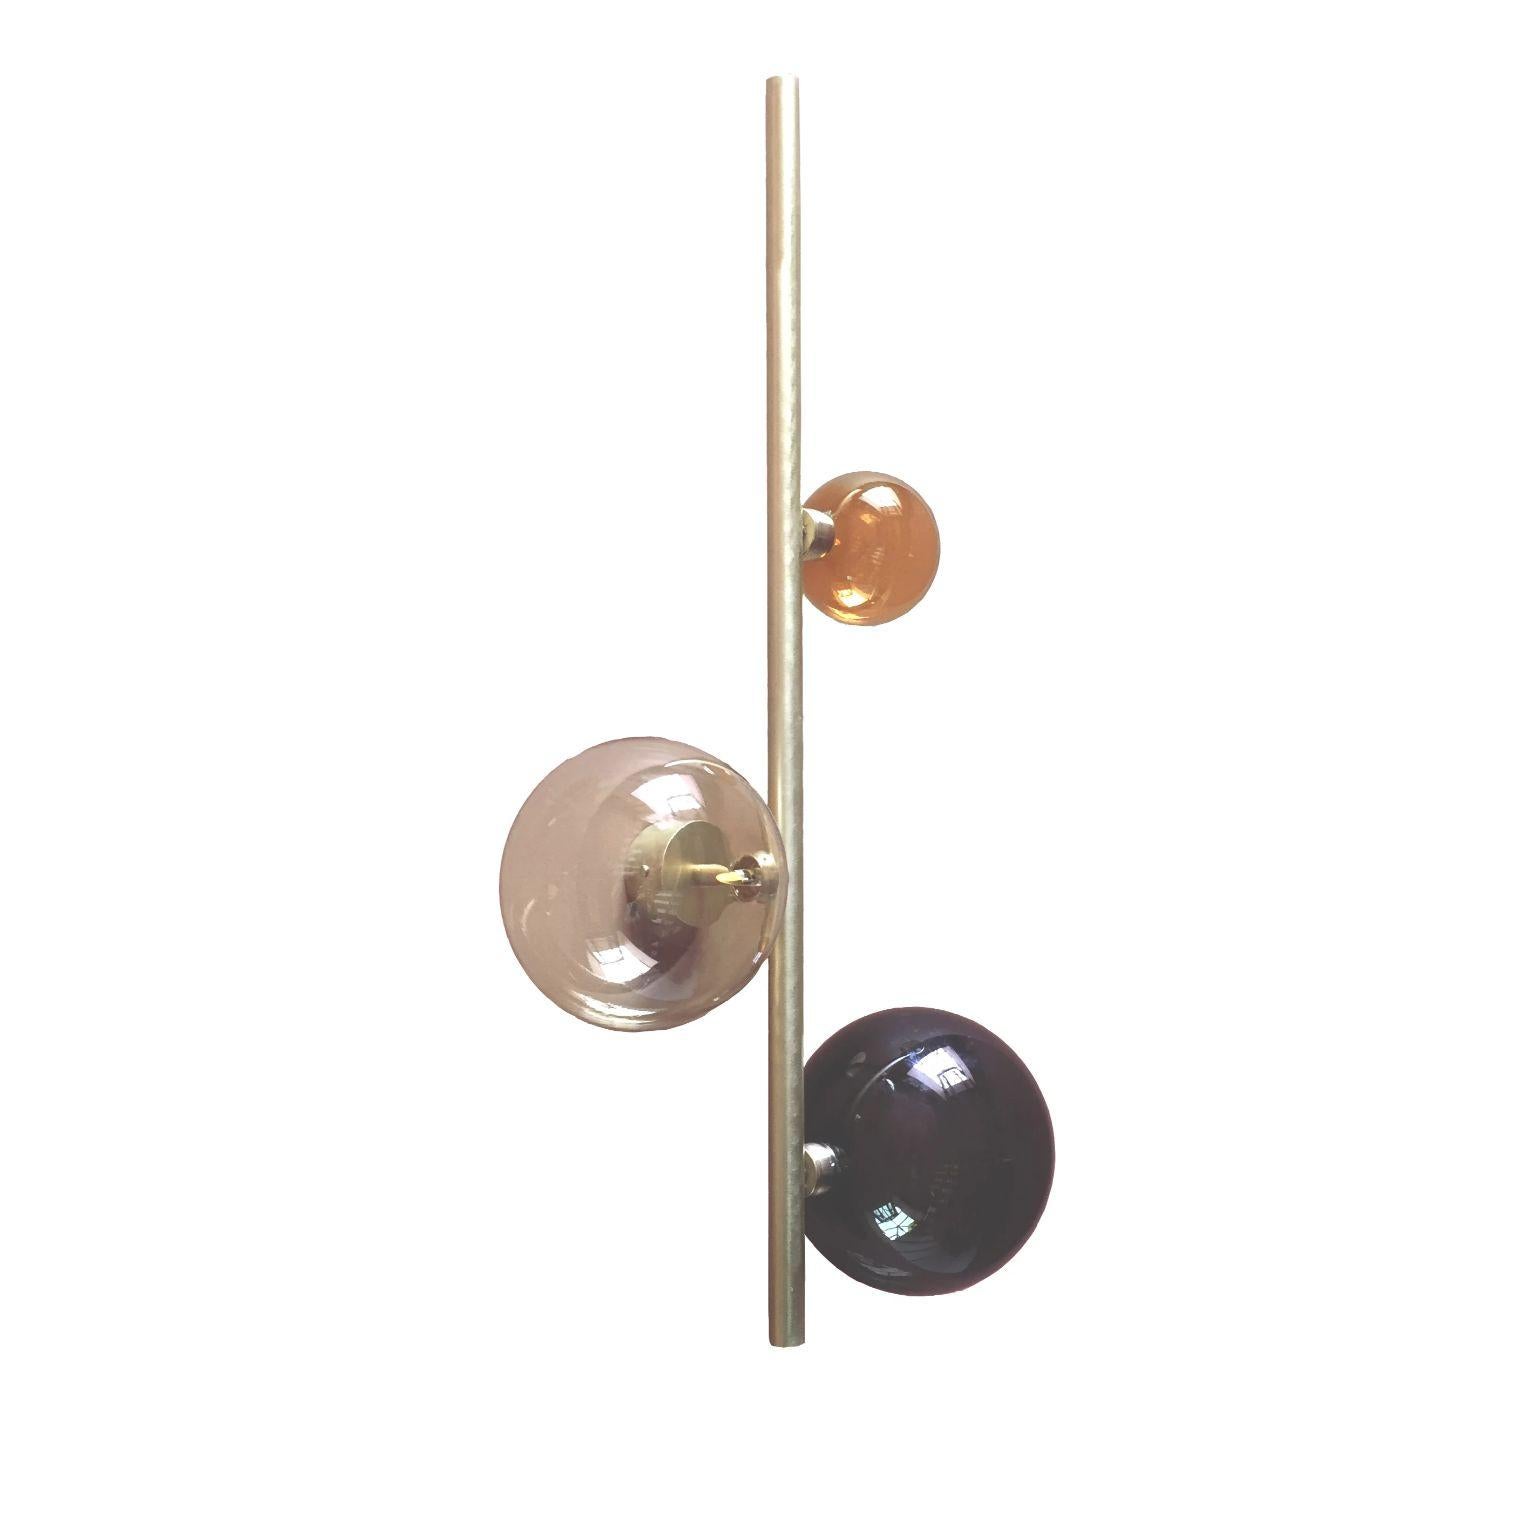 Cosmos sconce #3 by Emilie Lemardeley
Dimensions: D 19 x W 37 x H 70 cm
Materials: brushed brass, 3 glass spheres
Weight: 3 kg

The cosmos collection references to the old occidental belief that the Earth was the center of the universe. During